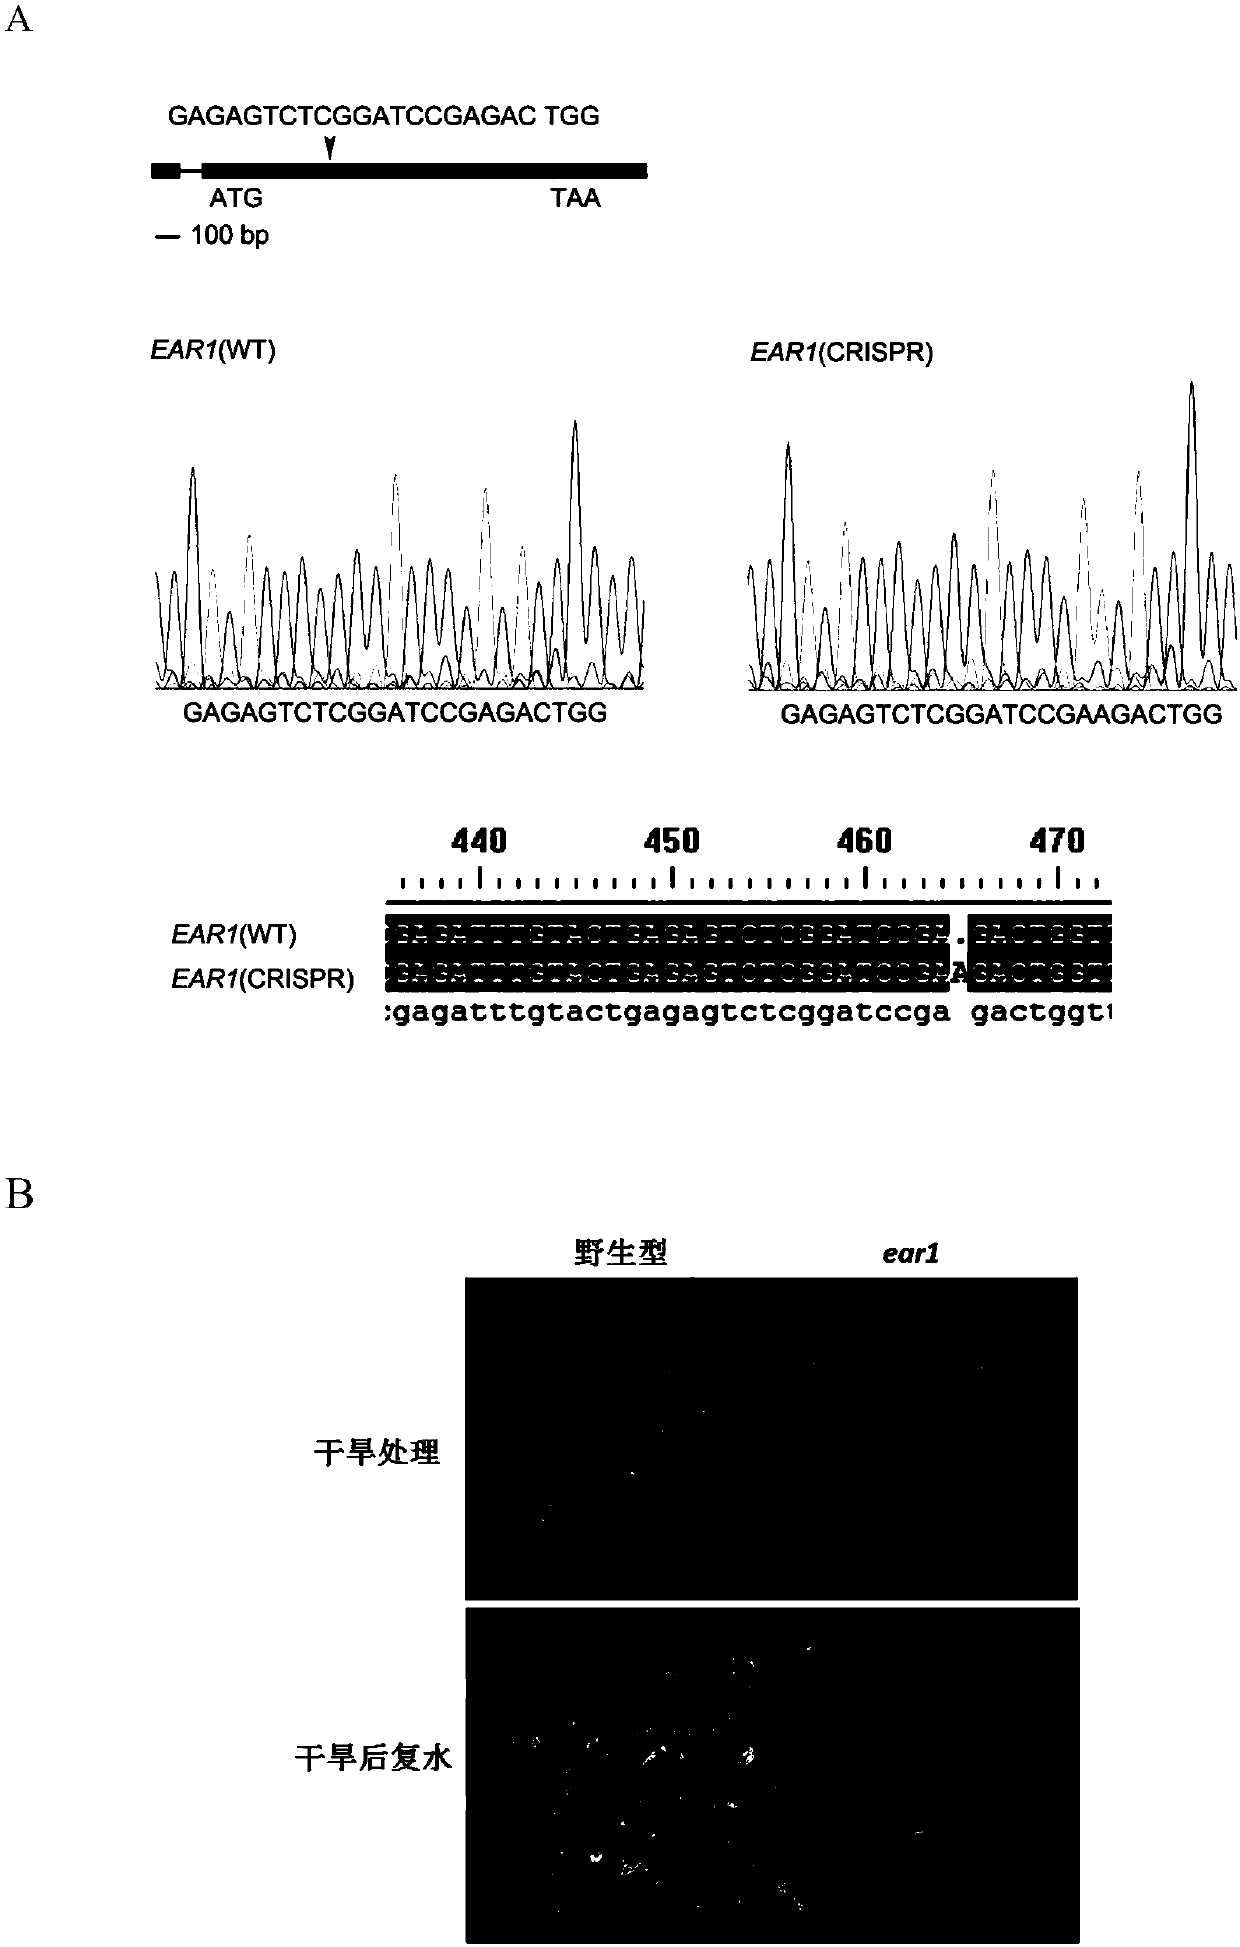 EAR1 protein related to plant drought resistance and coding gene thereof, and applications of EAR1 protein and coding gene